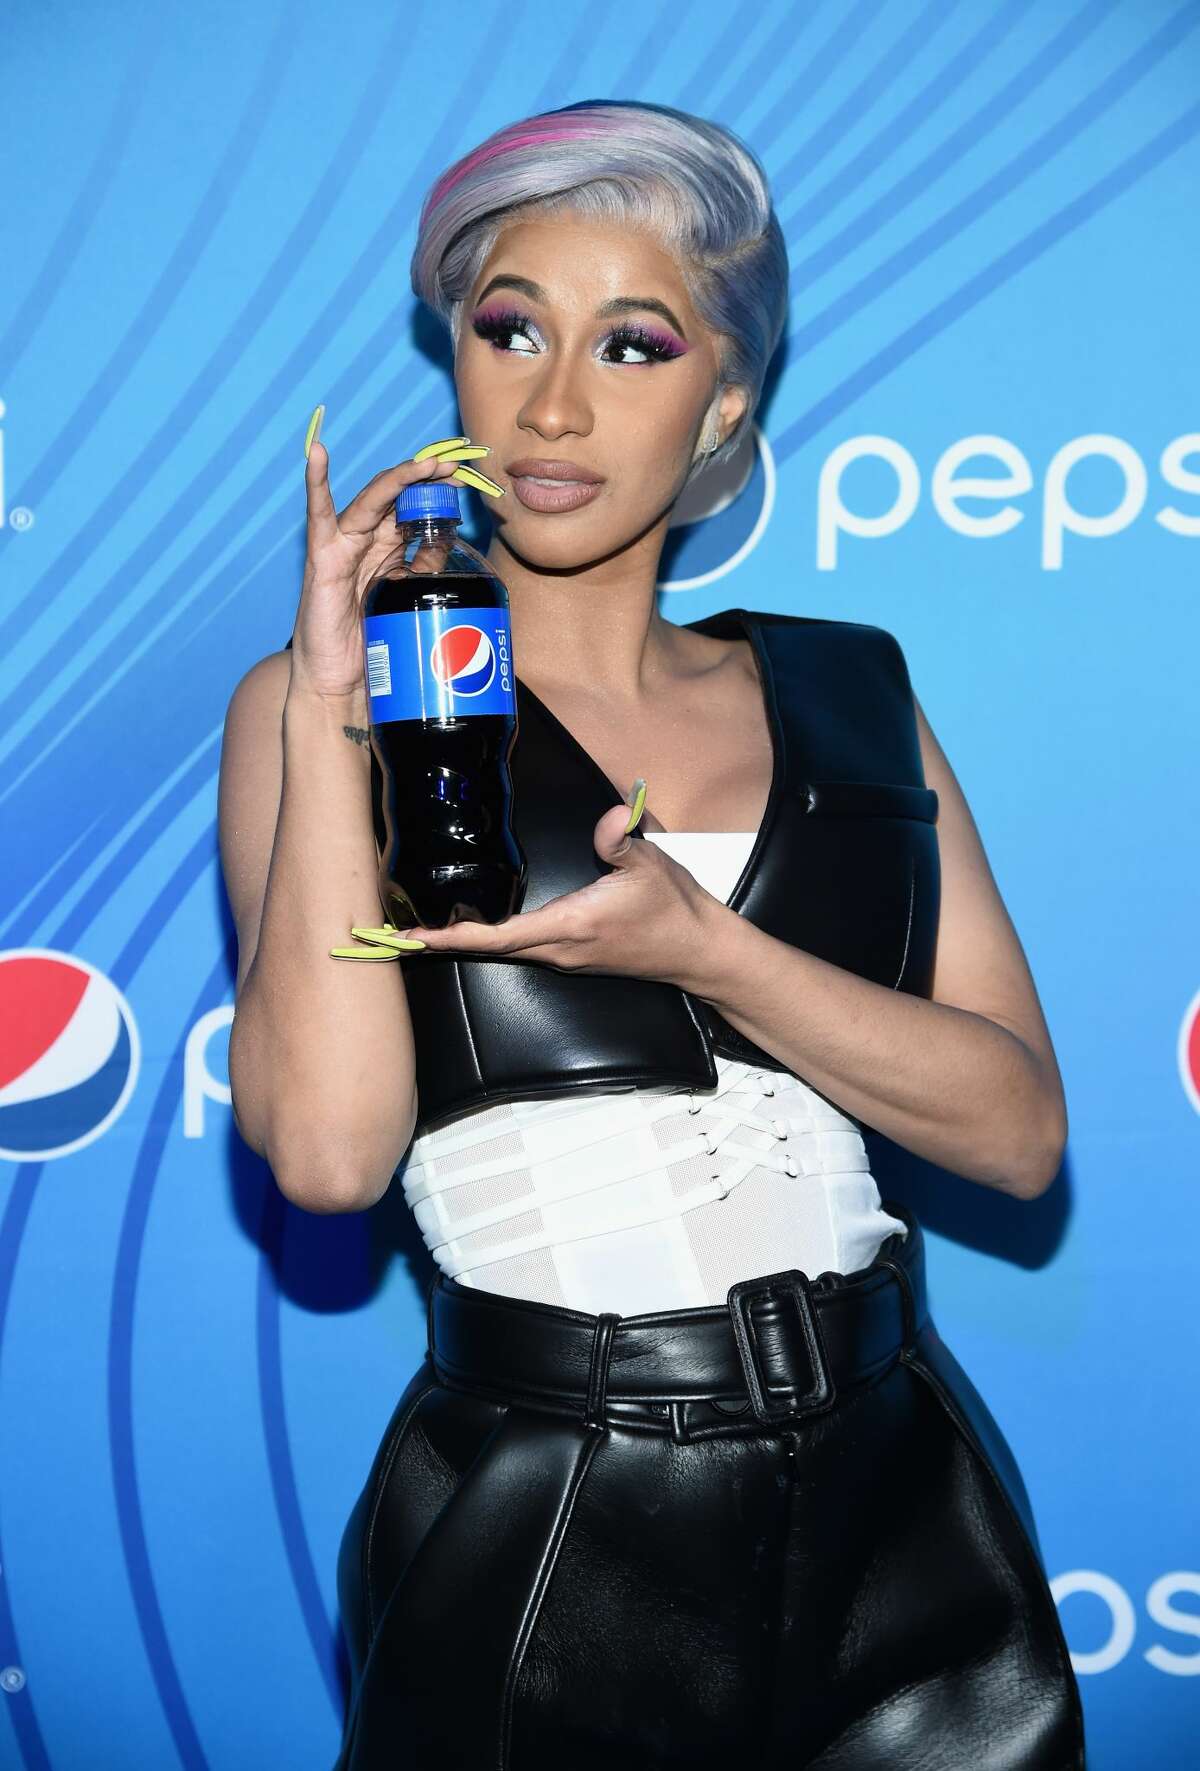 Cardi B attends "Planet Pepsi" Pre-Super Bowl LIII party, featuring Travis Scott, on February 1, 2019 in Atlanta, Georgia.  Owens' latest book, "Blackout: How Black America Can Make Its Second Escape from the Democrat Plantation," is slated to release September 15. In the book, Owens tackles the issue that liberal policies are harmful to Black Americans and that more and more Black politicians are joining her "BLEXIT" movement, which encourages Black politicians to align themselves as conservatives. Cardi B's latest single with rapper Megan Thee Stallion, "WAP," has broken numerous records. It holds the record for the most first-week streams for a song, it holds the biggest 24-hour debut for an all-female collaboration and it has cemented Cardi B as the only female rapper in history to top the Global Spotify chart on multiple occasions. 